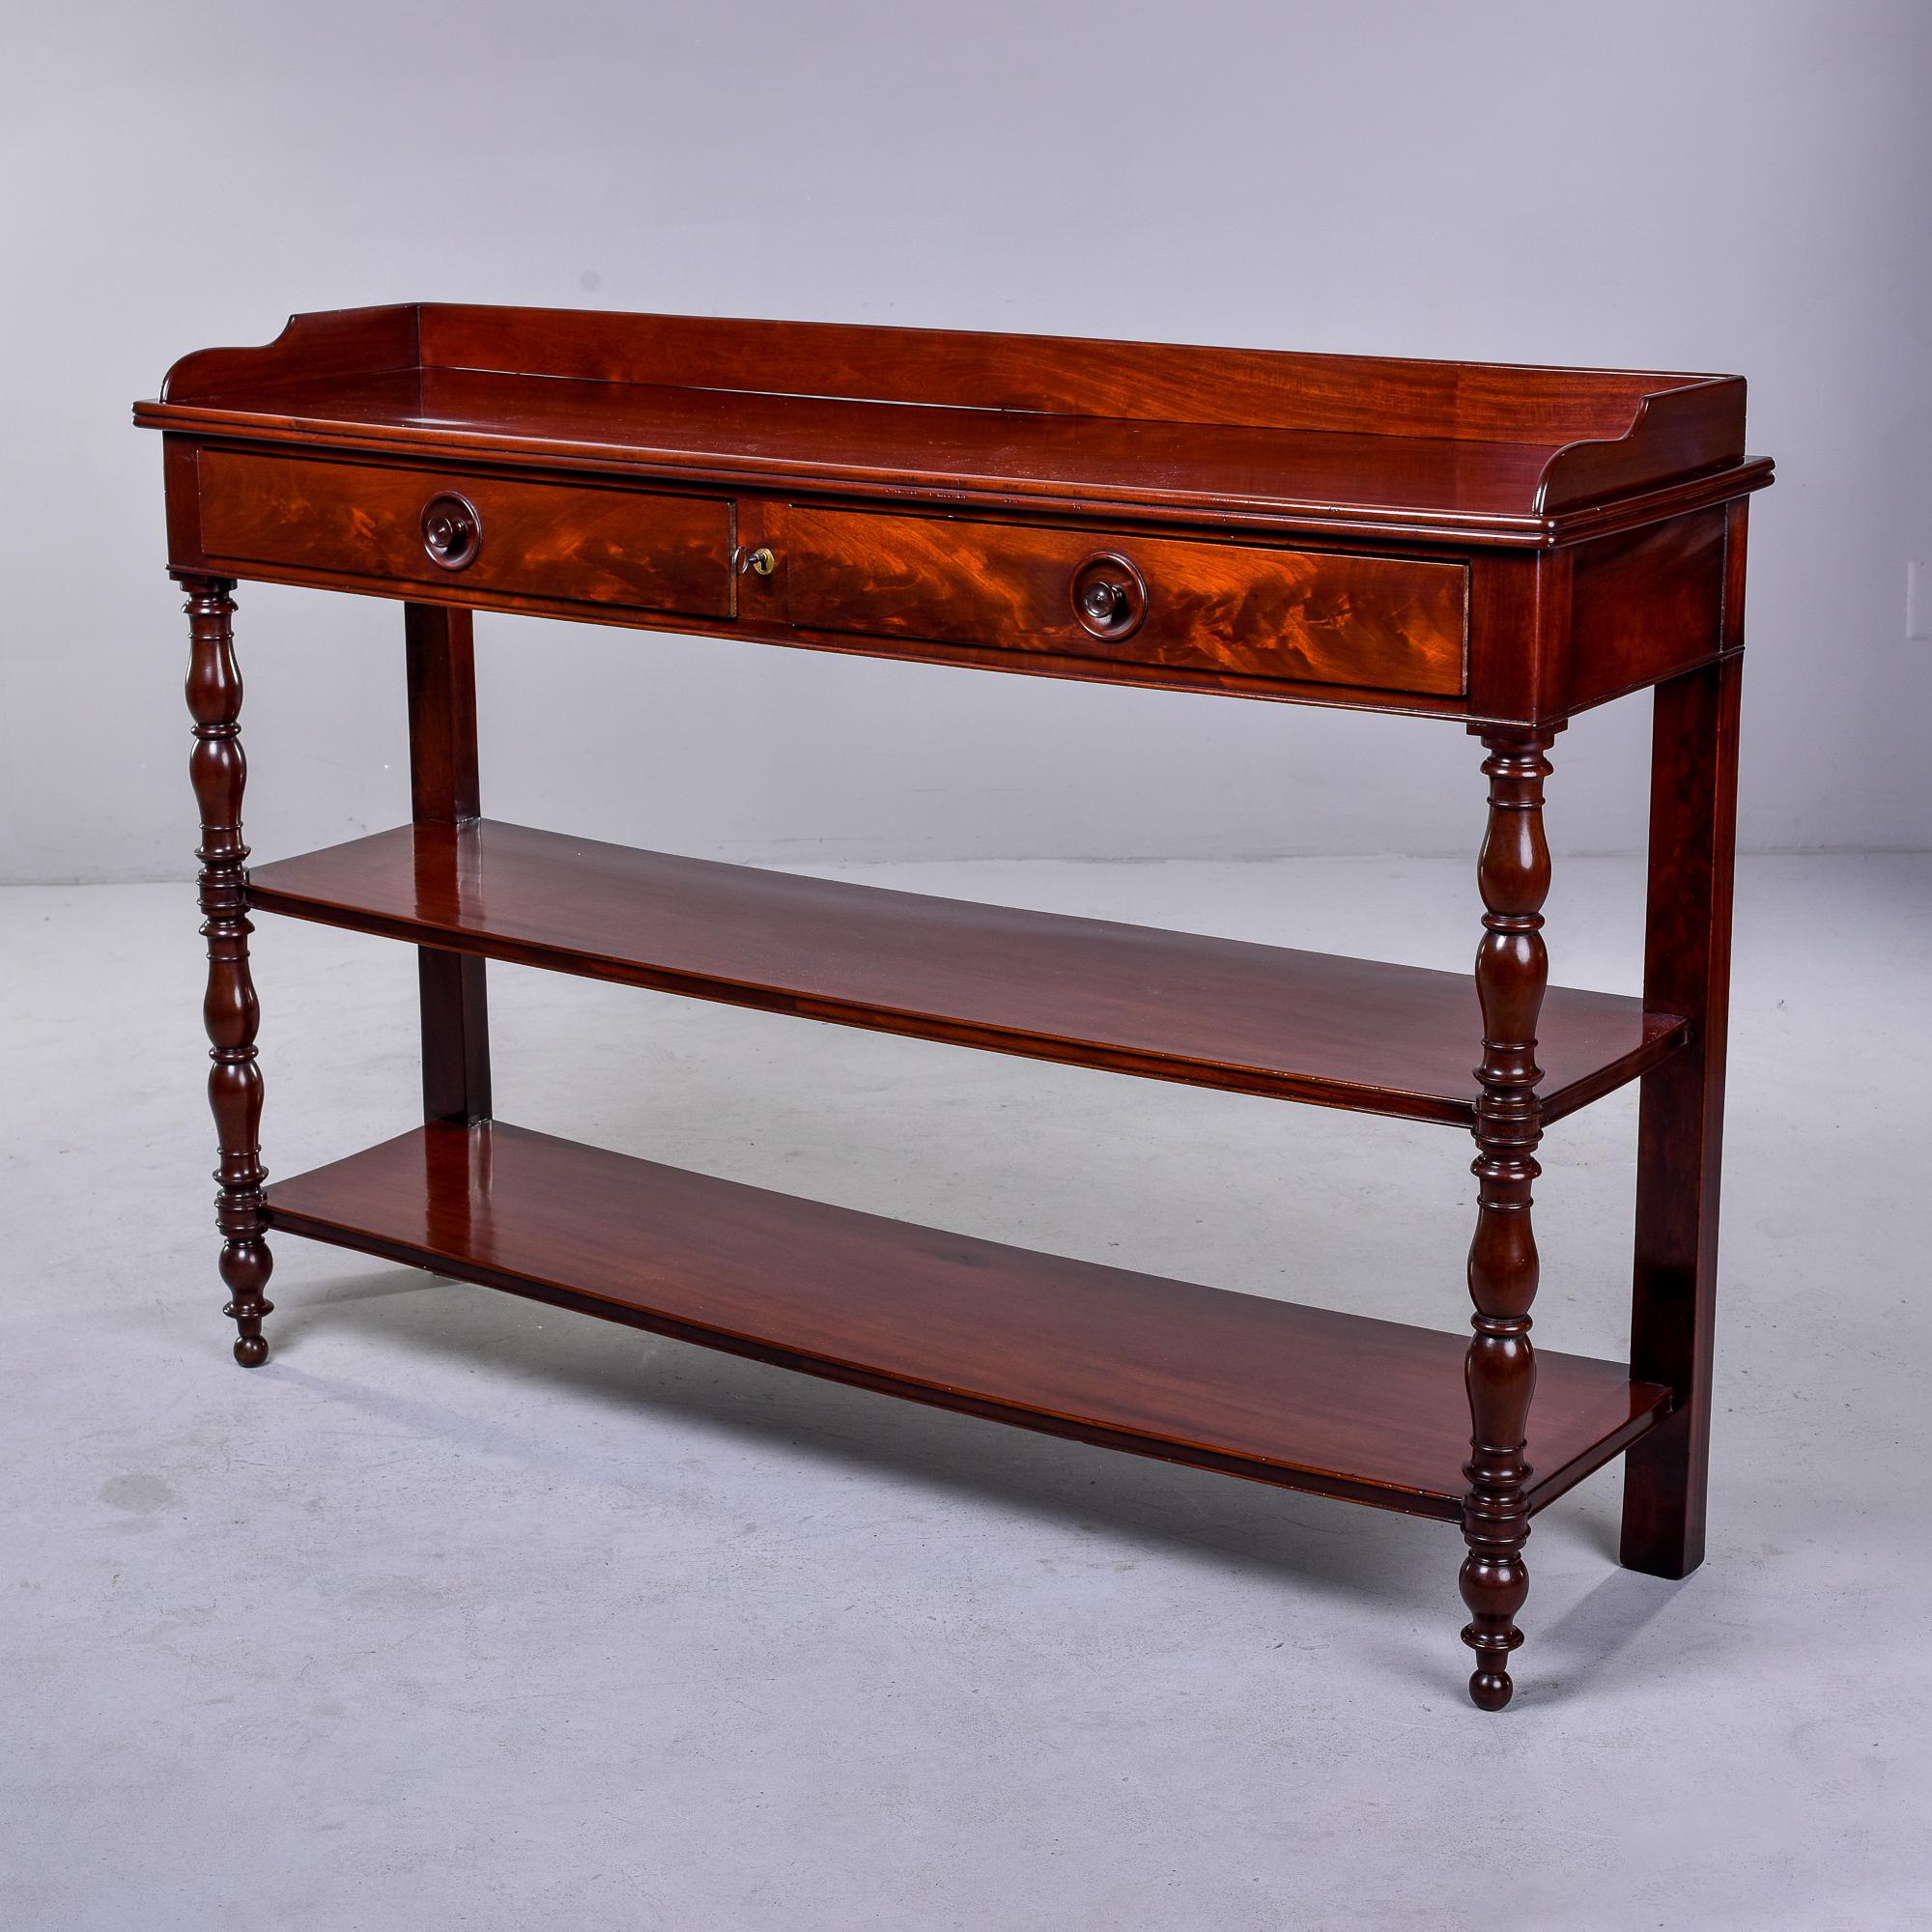 Found in England, this circa 1900 mahogany server table has a top with two drawers that have a functional lock and two lower tier shelves. Decorative turned legs in the front,nicely figured mahogany throughout. Unknown maker.

Very good overall